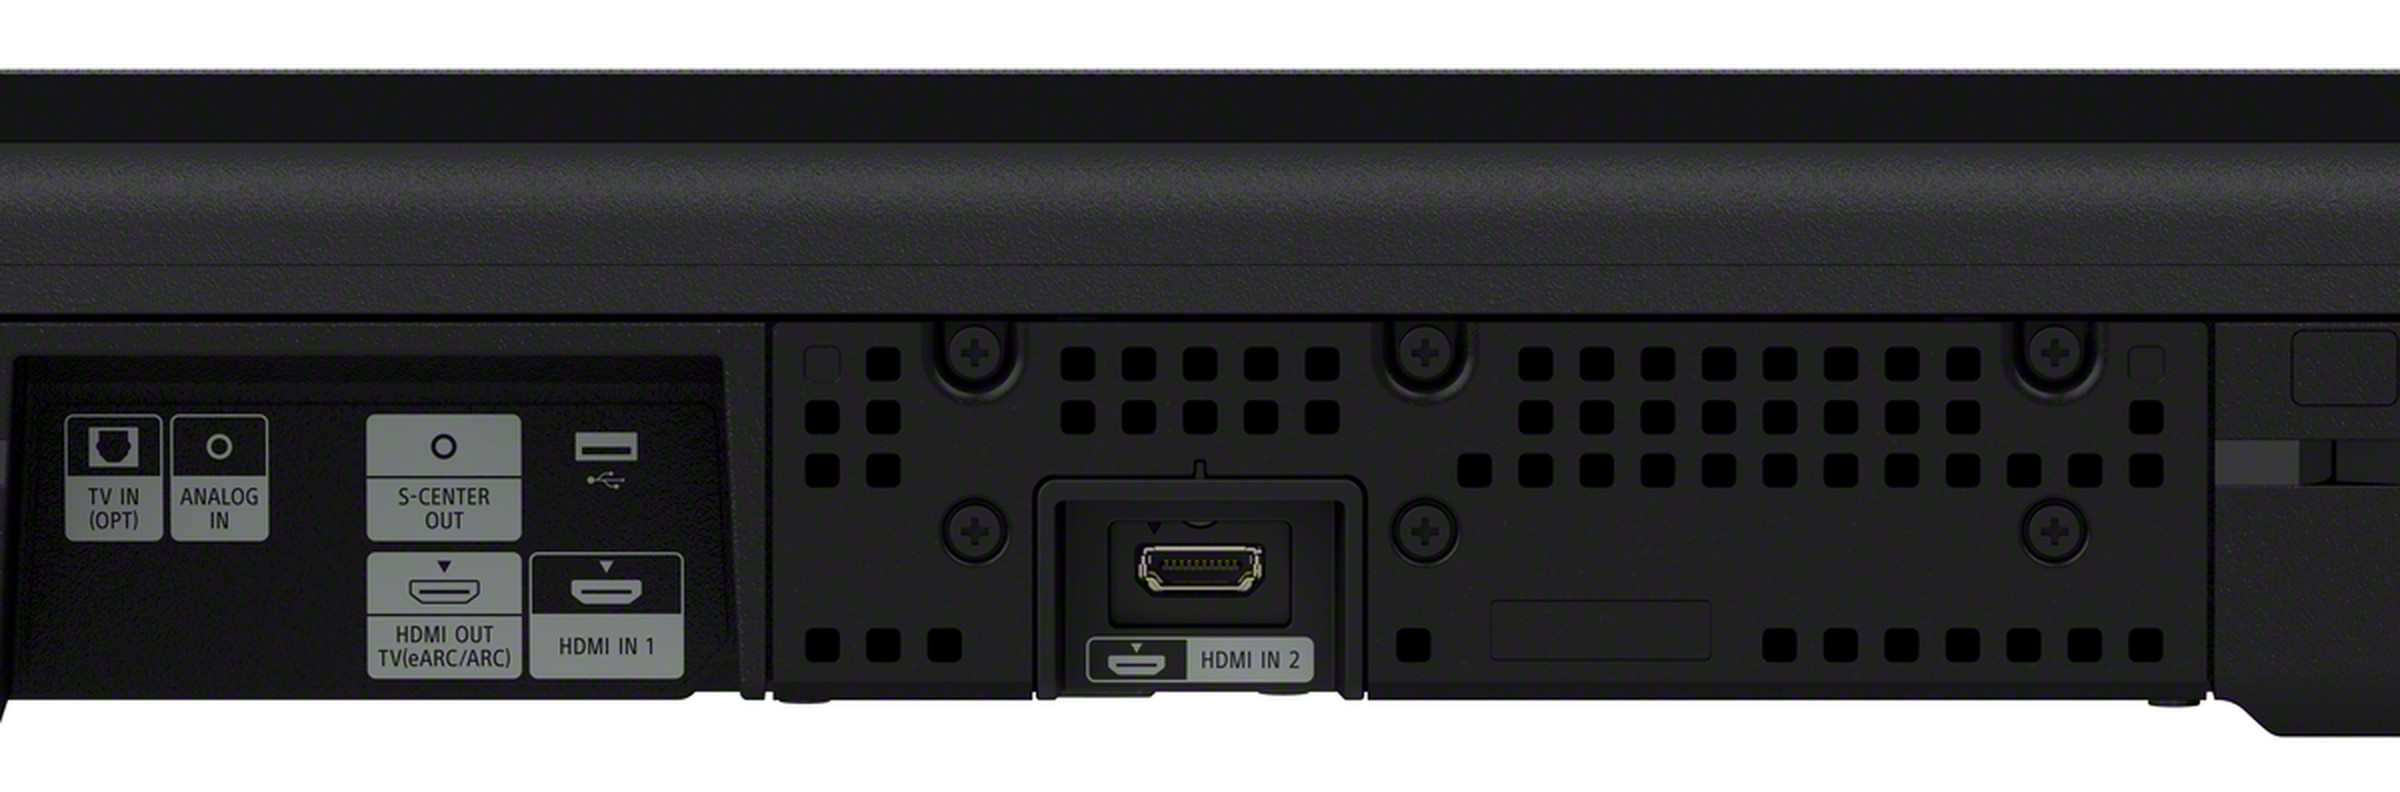 The A7000 has two HDMI 2.1 inputs.